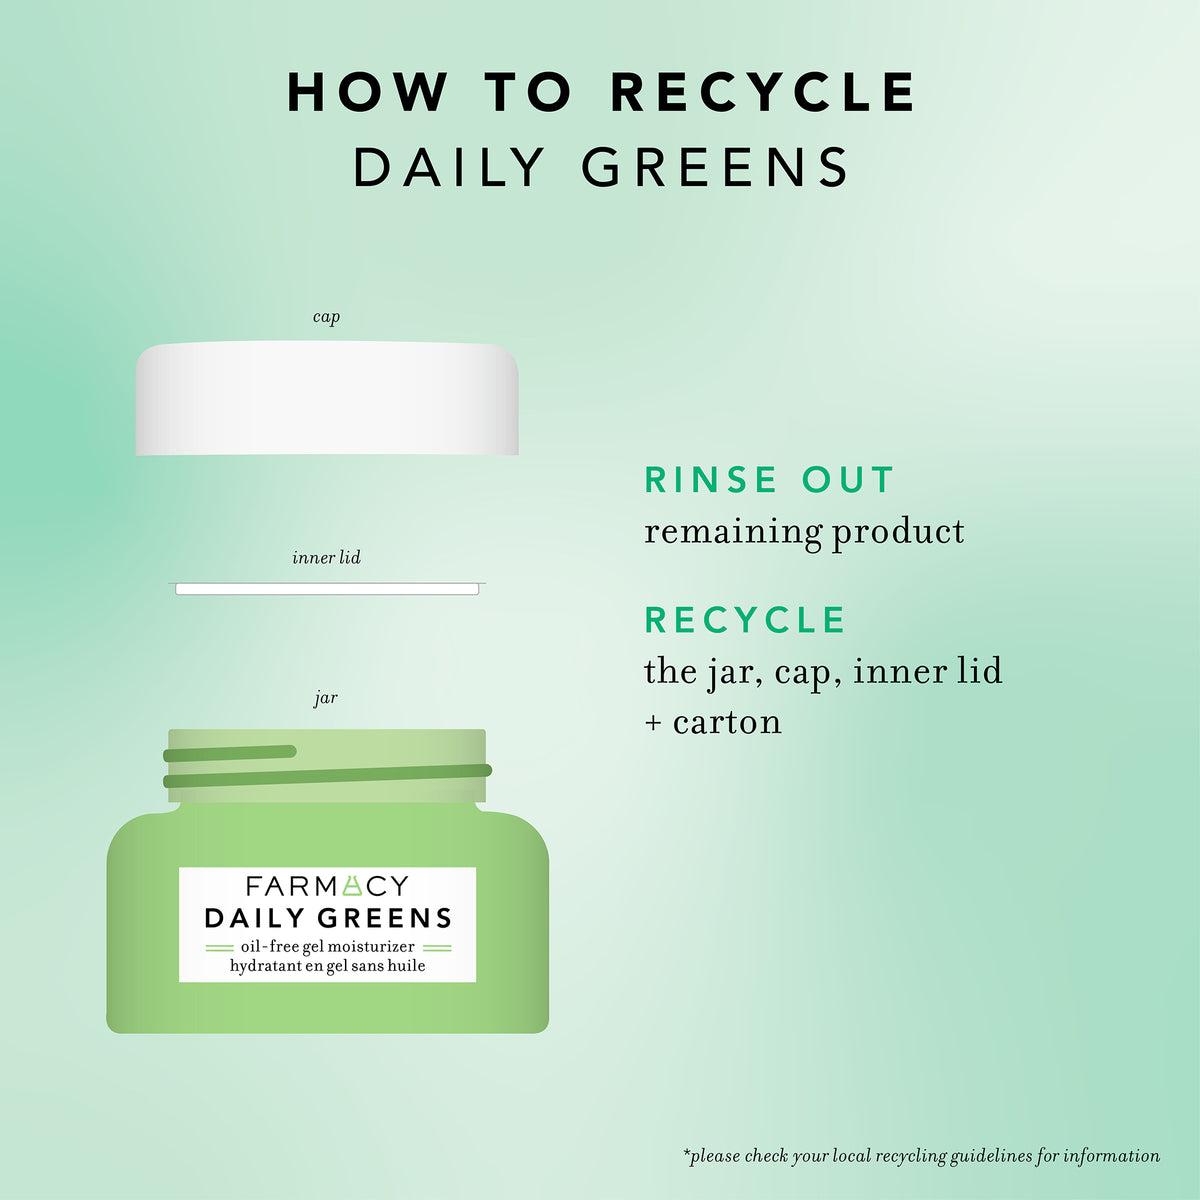 How to recycle Daily Greens